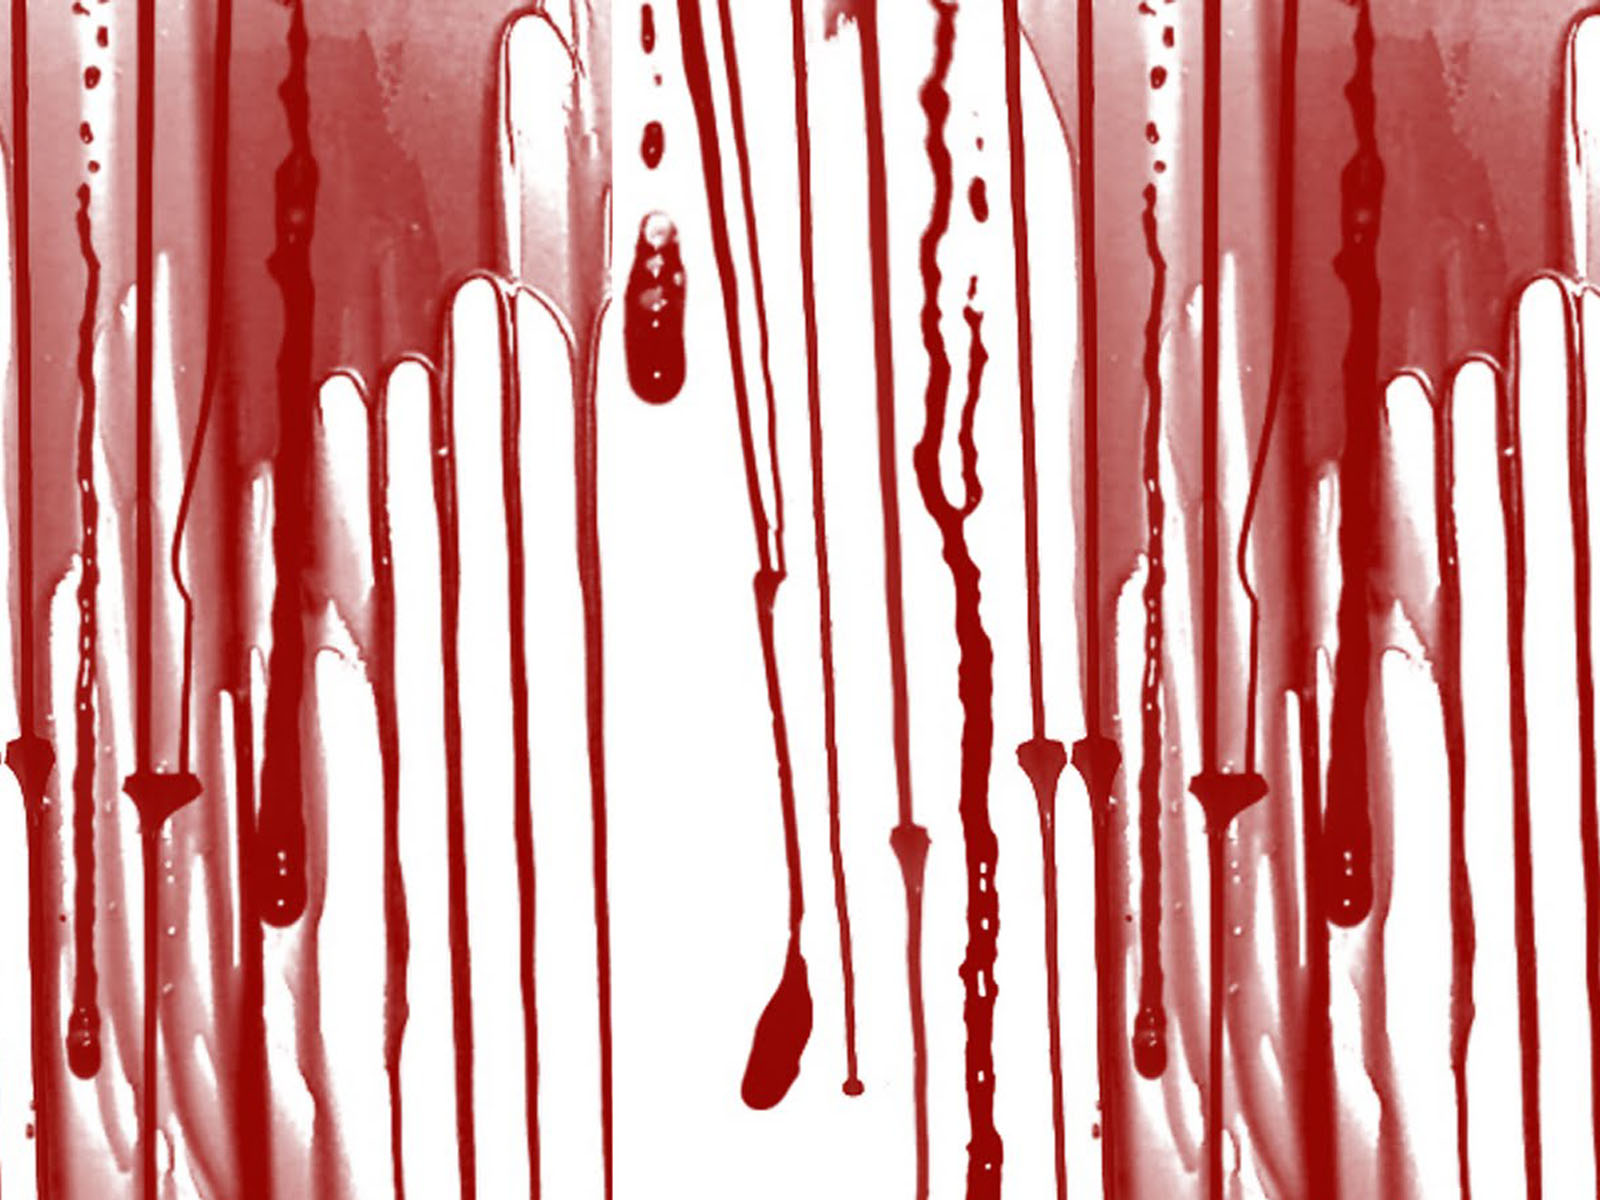 Realistic Dripping Blood PNG With Transparent Background PaintStainsAnd Splatter  Textures for Photoshop